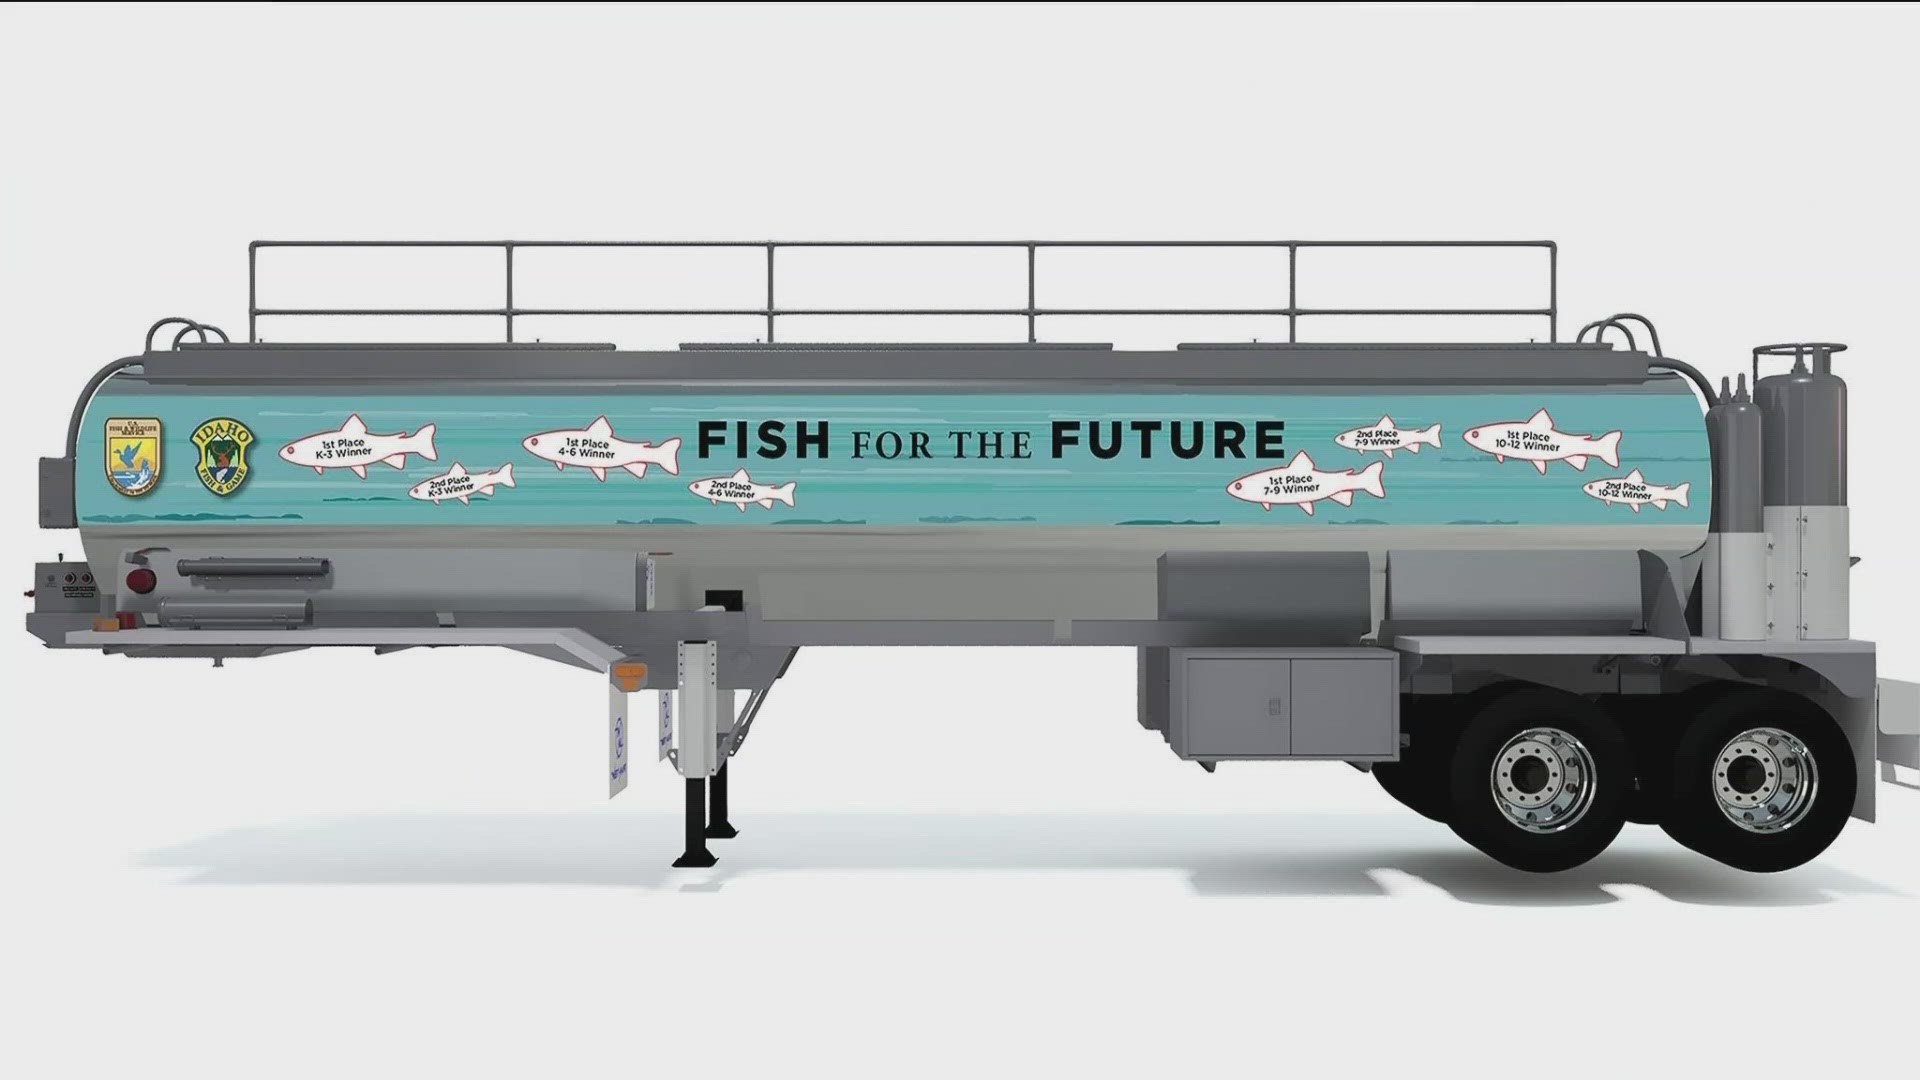 The contest is to update logos for fish transportation tanks.